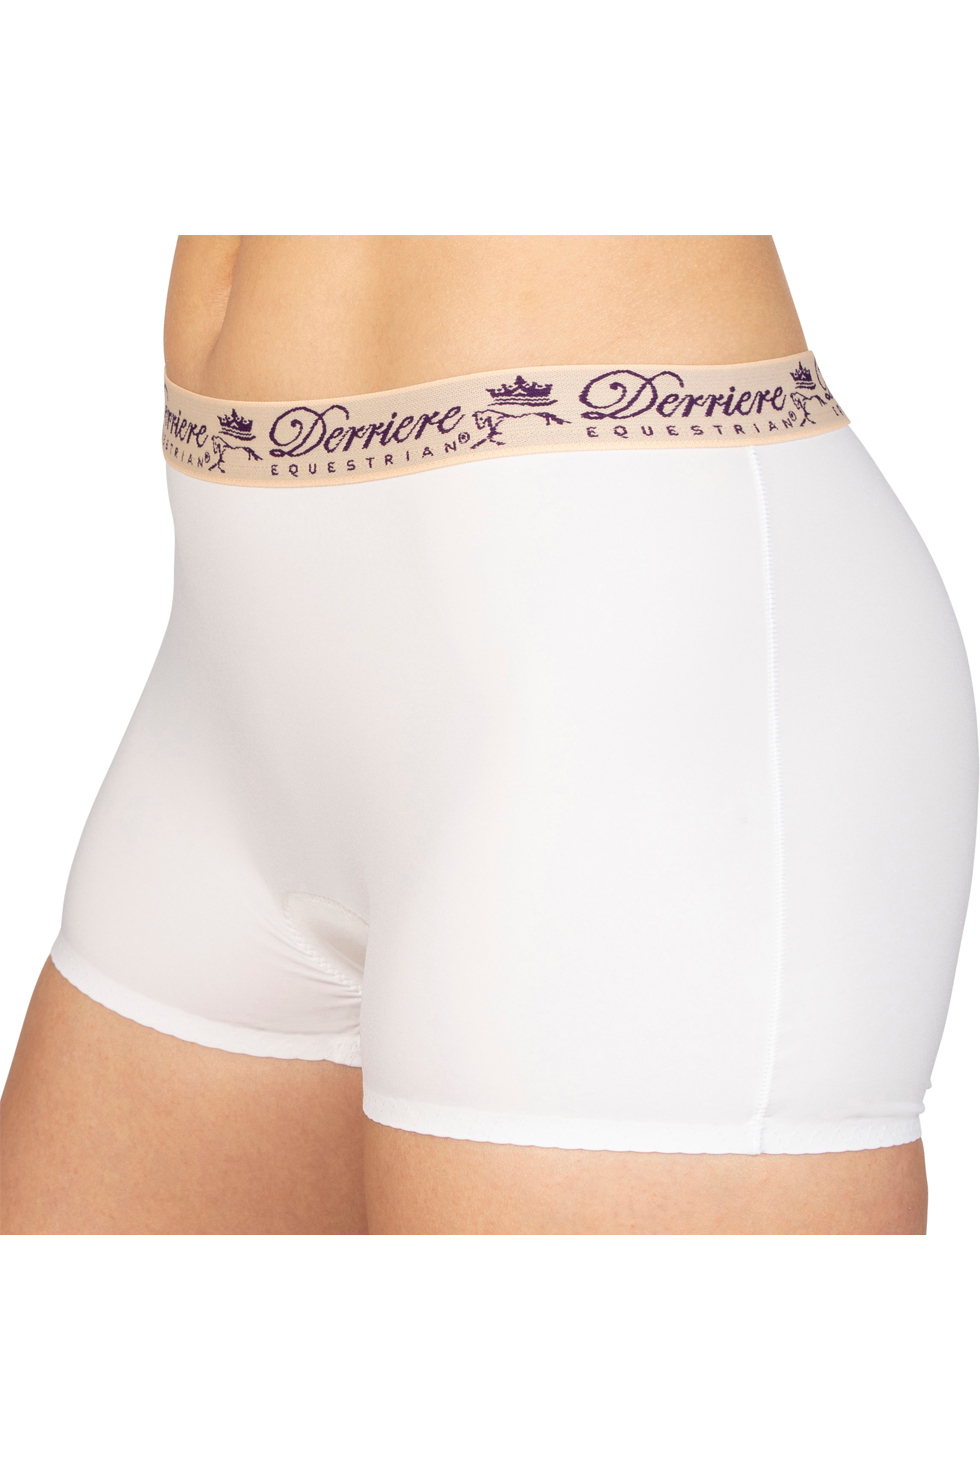 PERFORMANCE PADDED SHORTY – DERRIÈRE